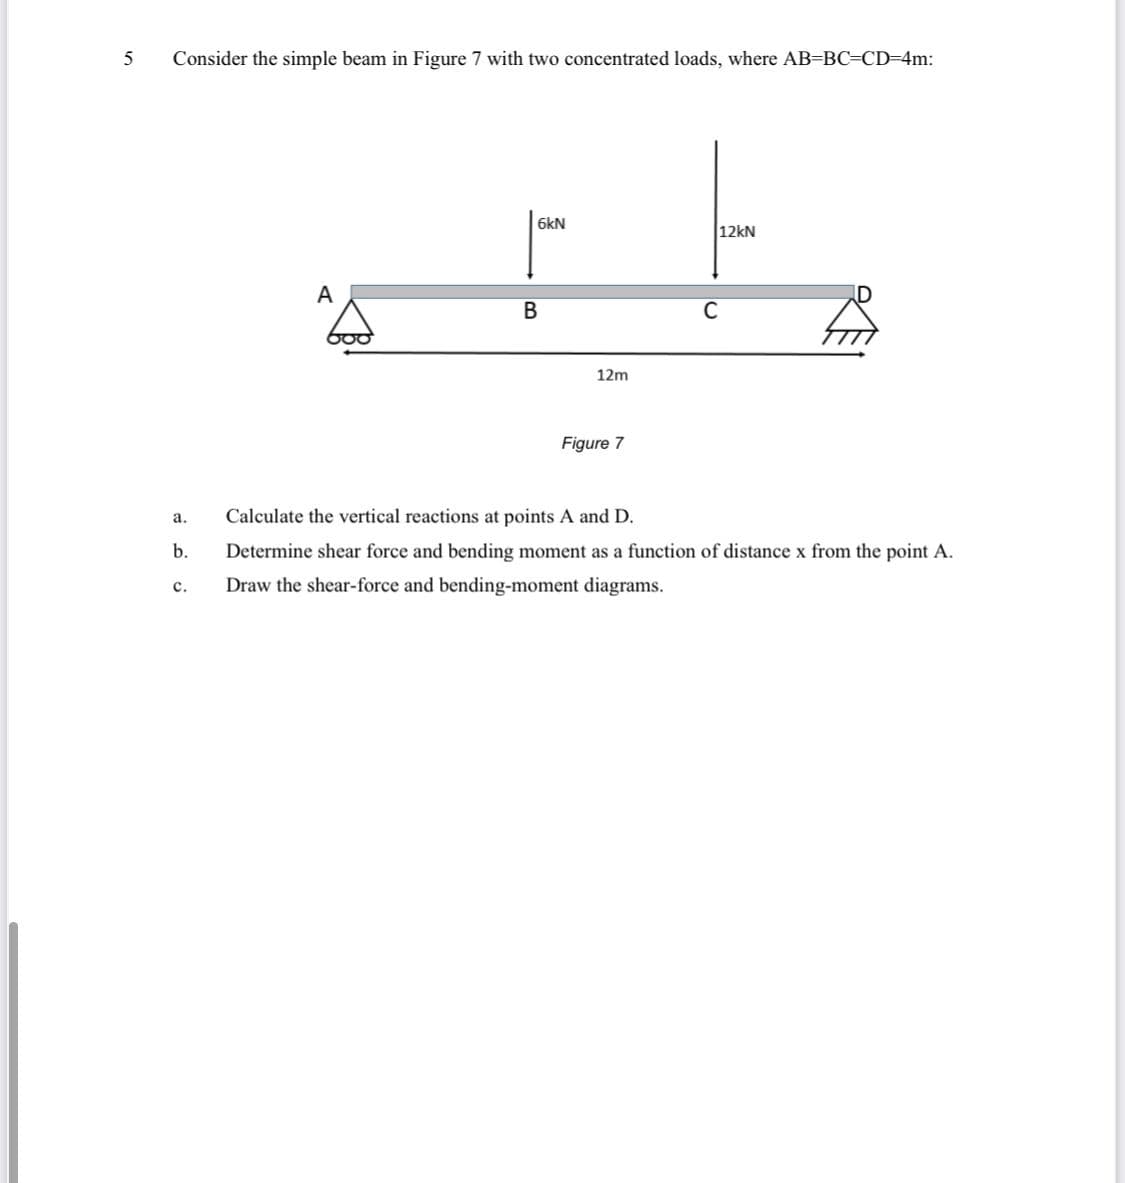 5
Consider the simple beam in Figure 7 with two concentrated loads, where AB=BC=CD=D4m:
6kN
12kN
A
В
C
12m
Figure 7
a.
Calculate the vertical reactions at points A and D.
b.
Determine shear force and bending moment as a function of distance x from the point A.
Draw the shear-force and bending-moment diagrams.
с.
